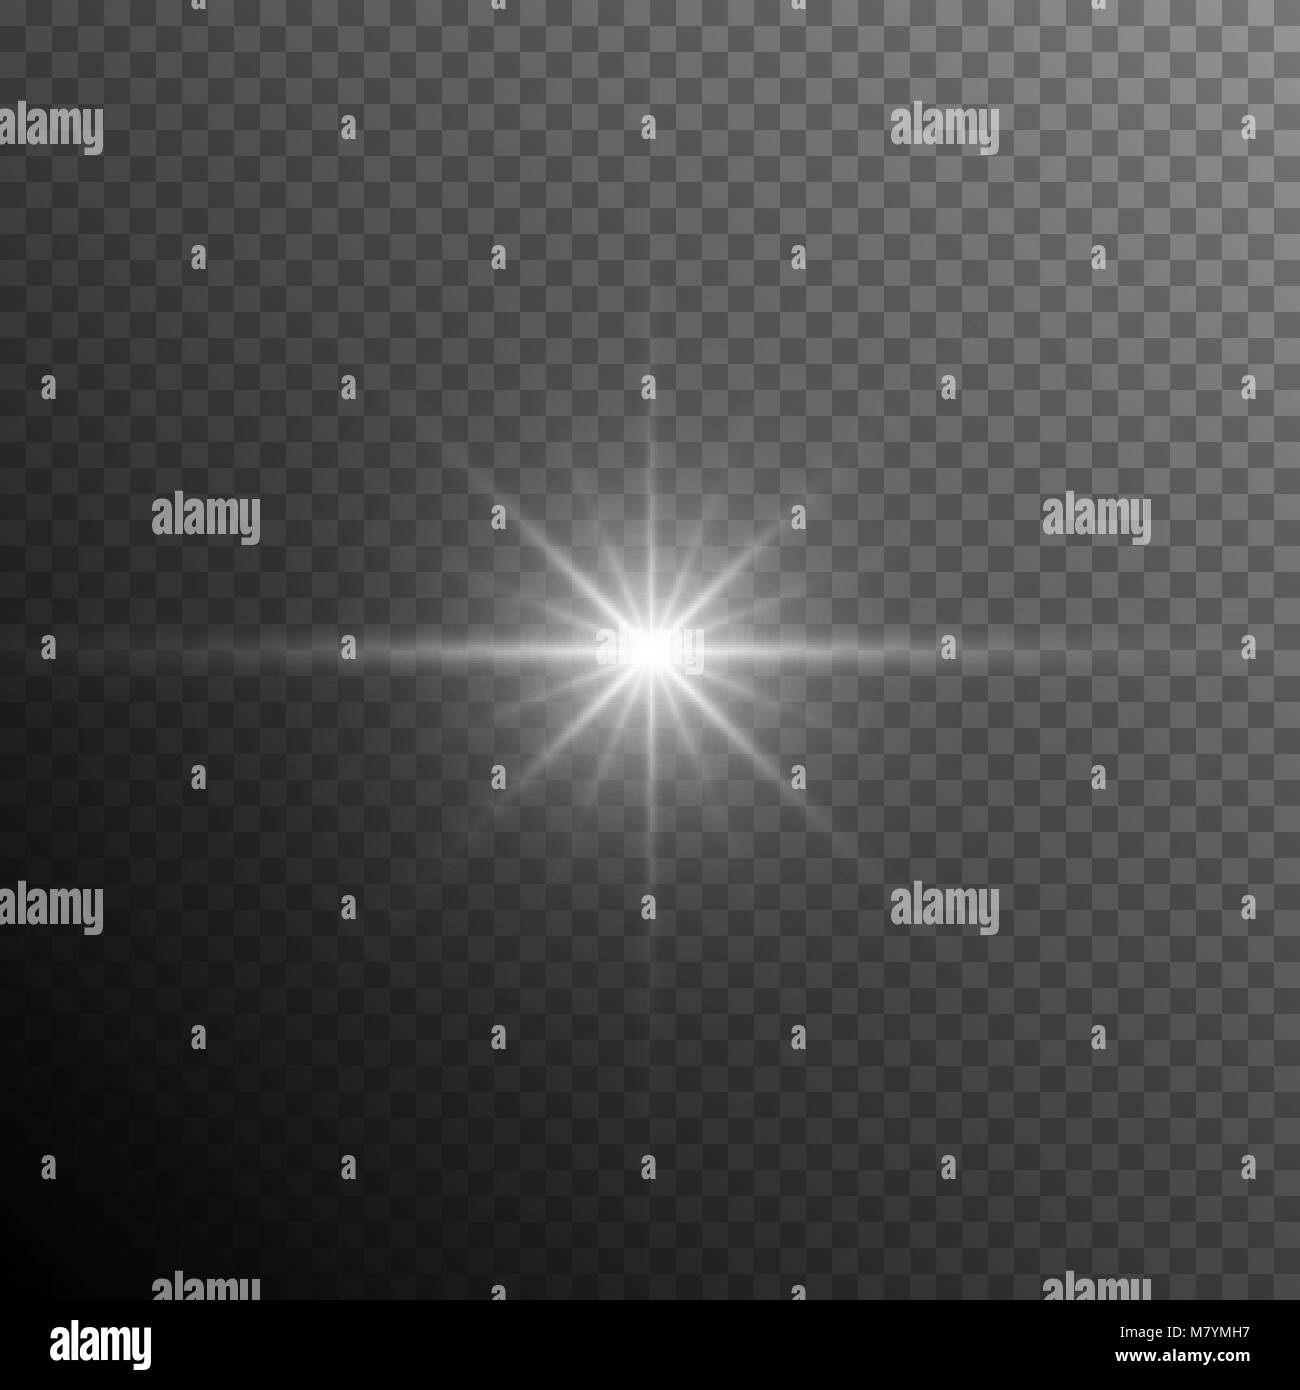 Glow light lens flare special effect. Shiny starburst with sparkles. Transparent sun flash with spotlight and rays Stock Vector